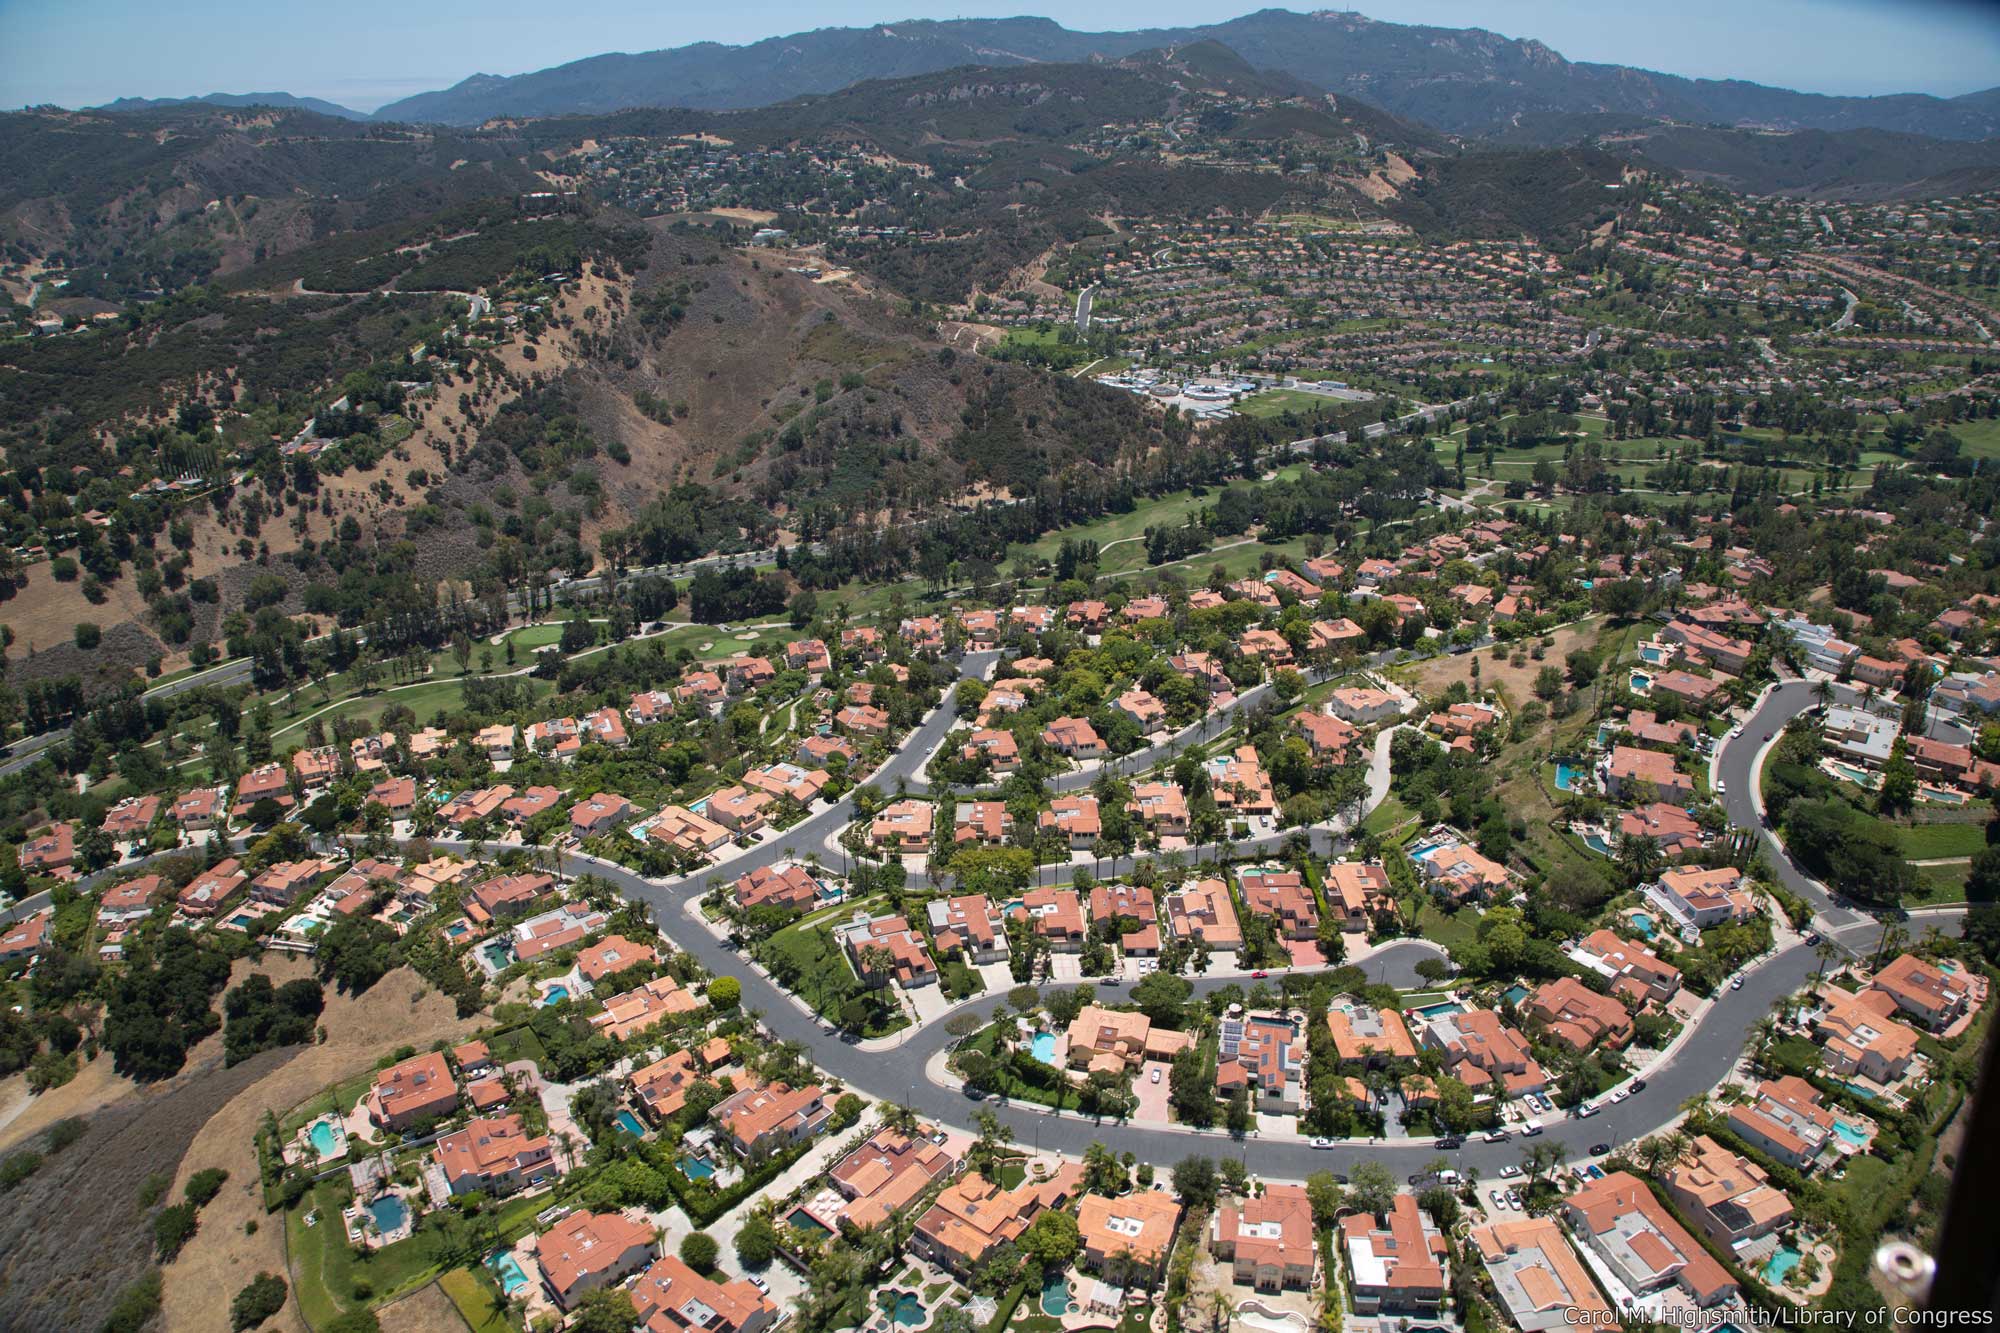 Aerial photograph of a housing development in Los Angeles, California, USA. The photo shows regularly spaced houses built along sinuous roads. The grass and trees around the houses are green. In the background, undeveloped hillsides can be seen. These have yellow and brown grass with scattered trees.